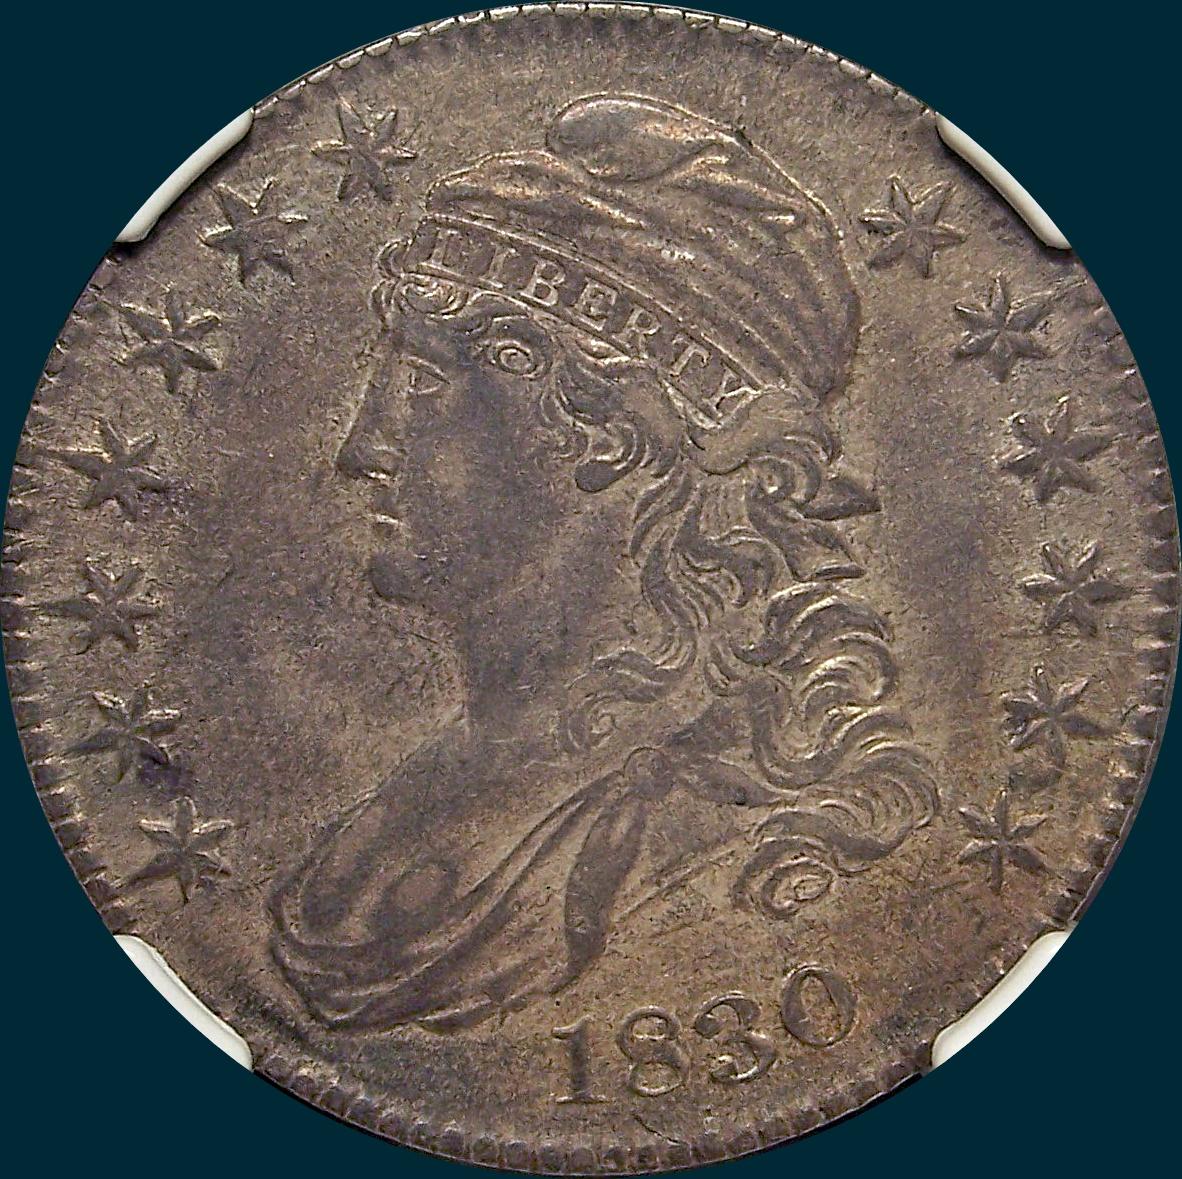 1830, O-108, Small 0, Capped Bust Half Dollar